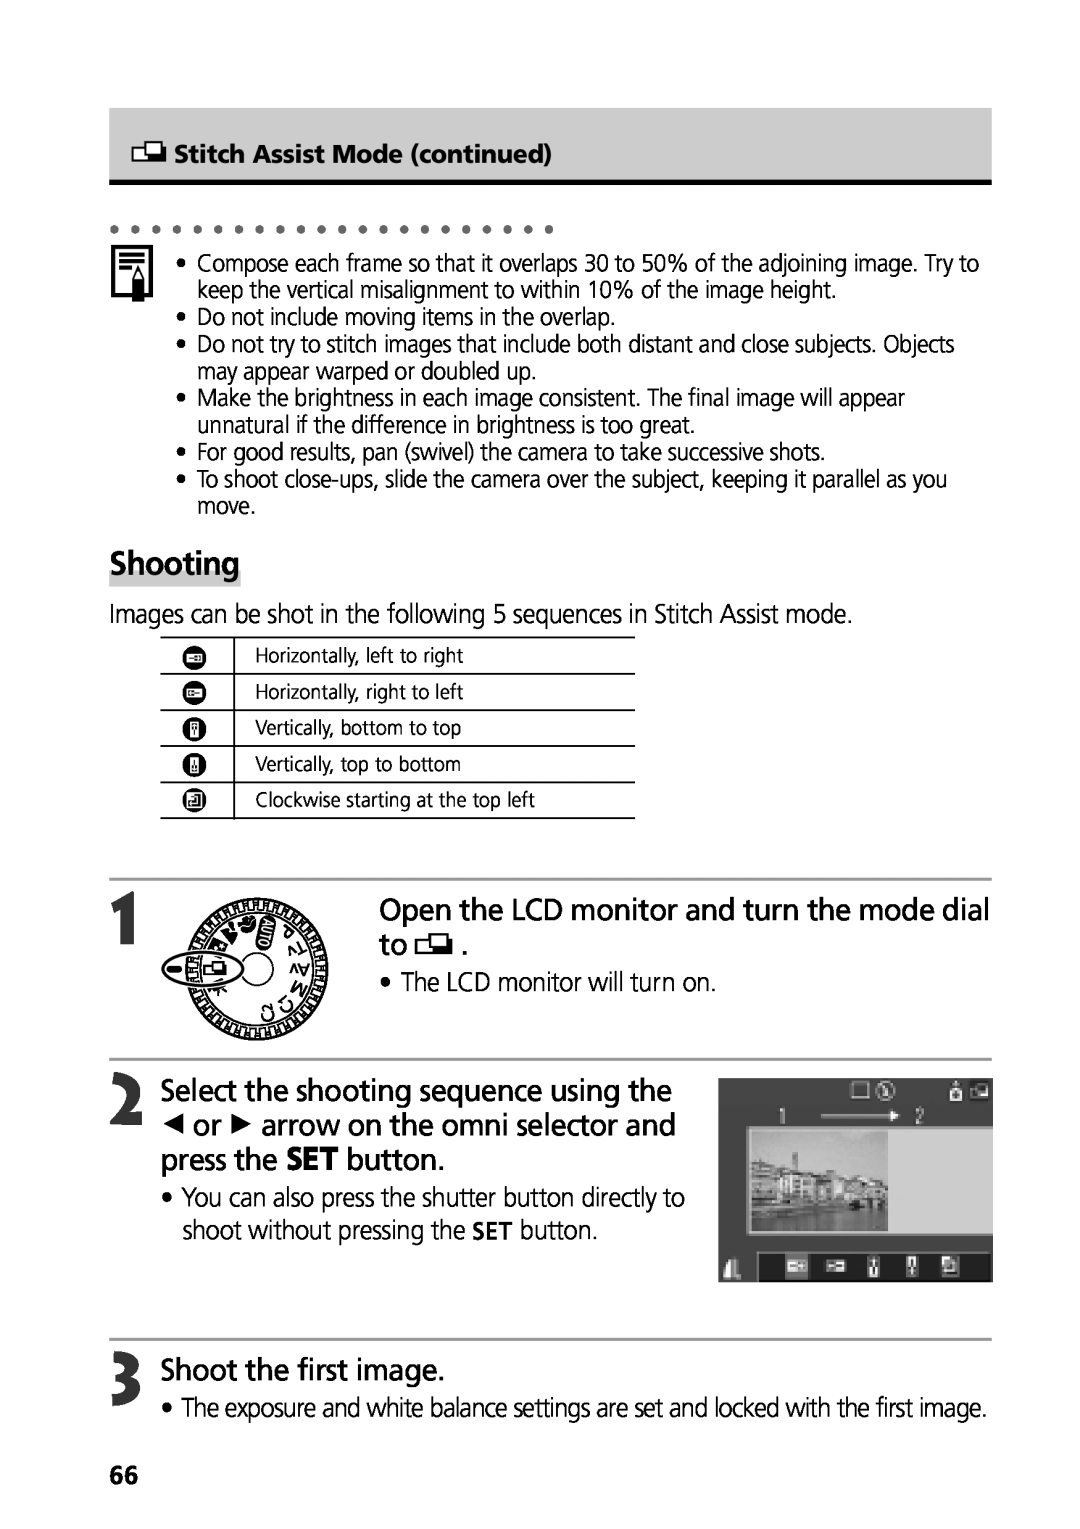 Canon G3 manual Shooting, Open the LCD monitor and turn the mode dial, Select the shooting sequence using the 